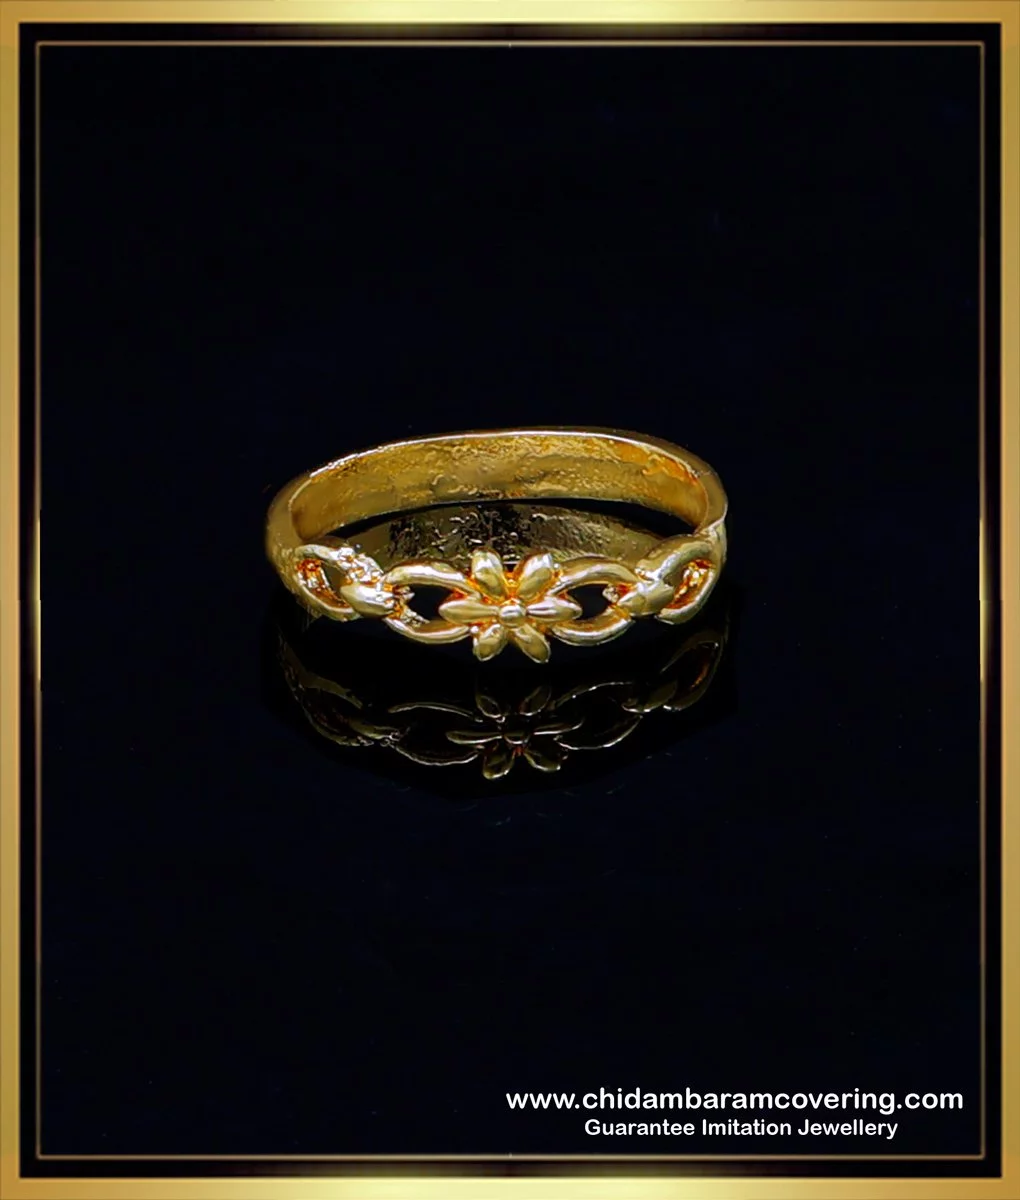 Latest Gold Ring Designs | Light Weight Gold Rings 22k - Daily Wear & ca...  | Gold ring designs, Latest gold ring designs, Gold finger rings